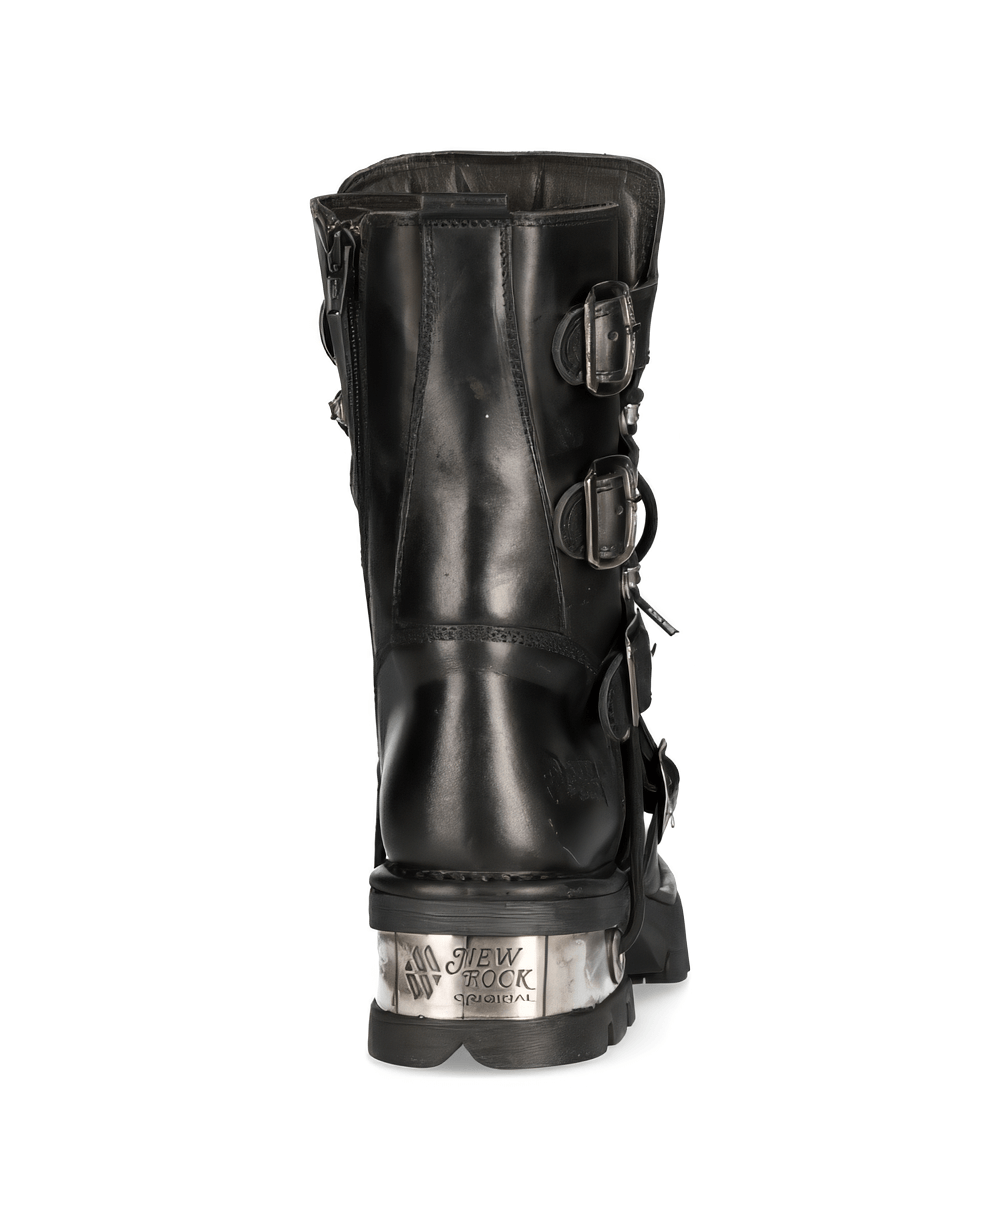 NEW ROCK Gothic Style Lace-Up Boots with Metallic Accents